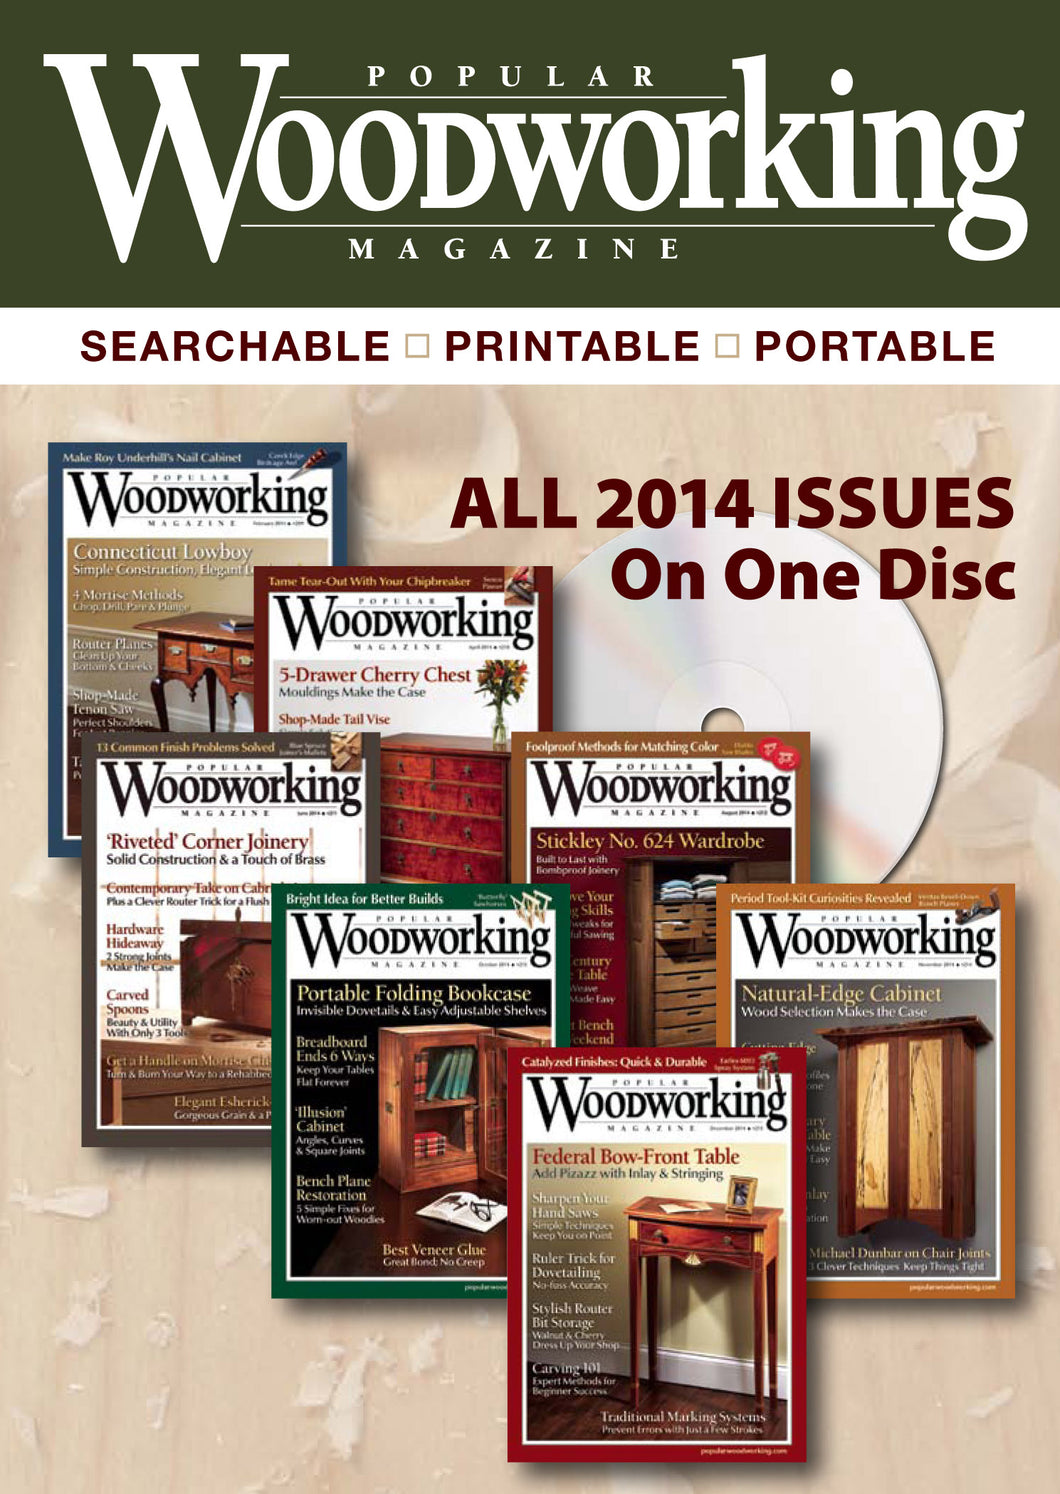 Popular Woodworking Magazine 2014 Collection Digital Edition